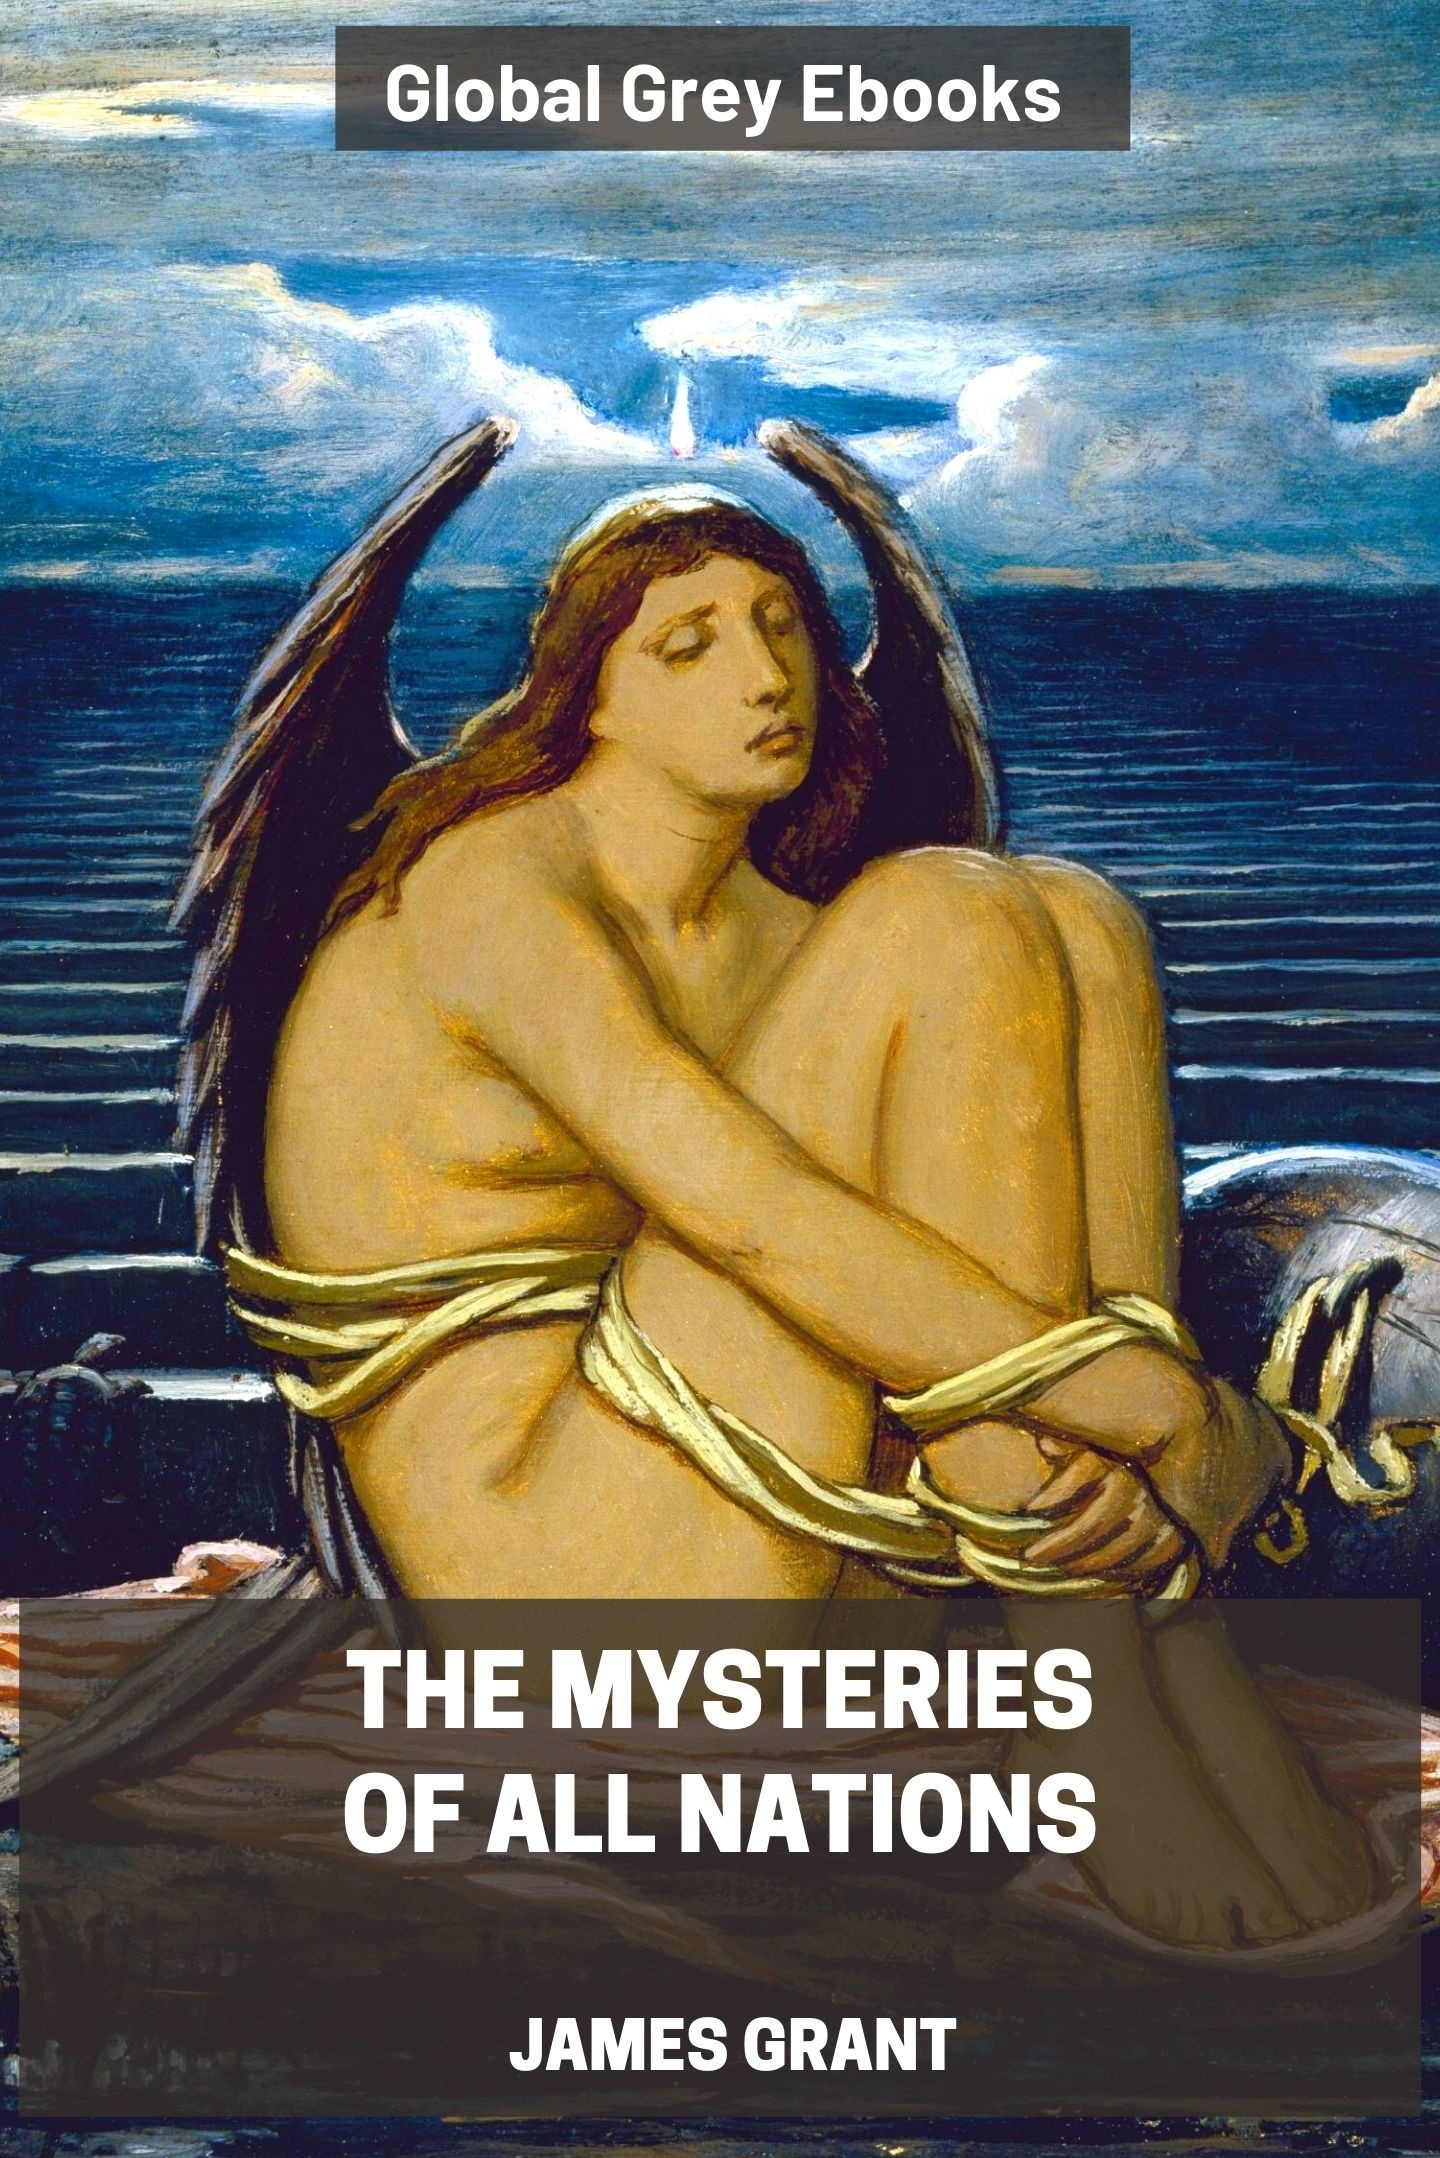 The Mysteries of All Nations, by James Grant - Complete text online image